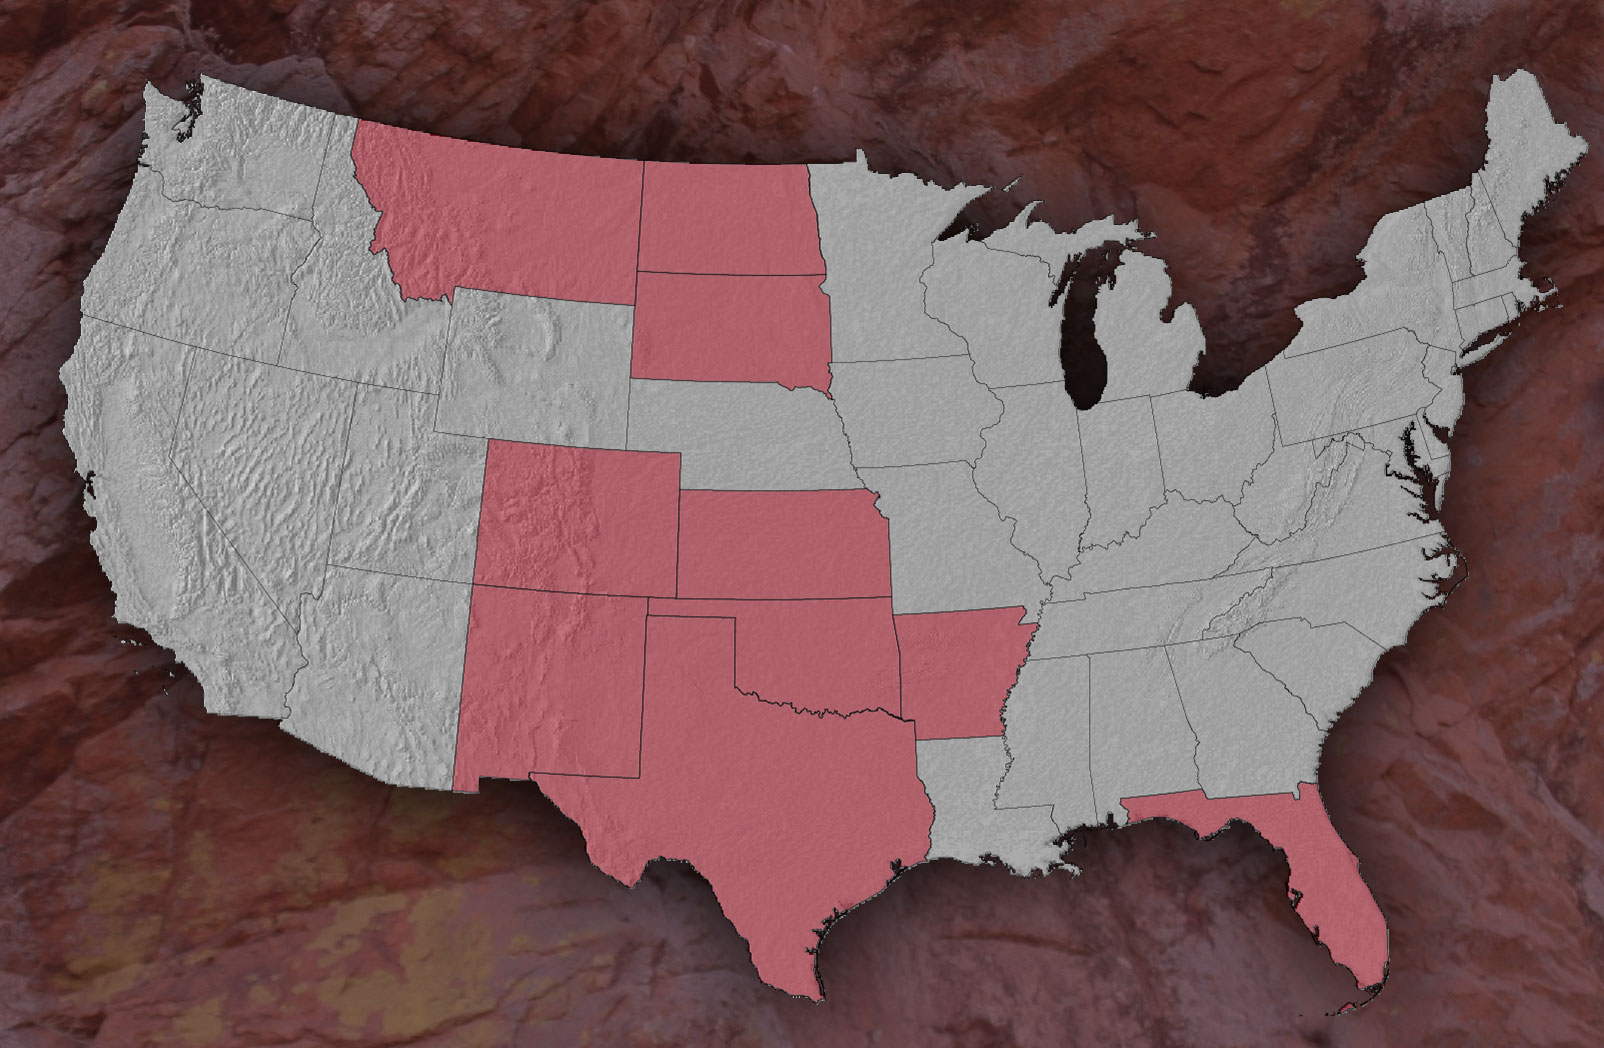 View of the USA Map with all the States highlighted that Panhandle has minerals assets in.